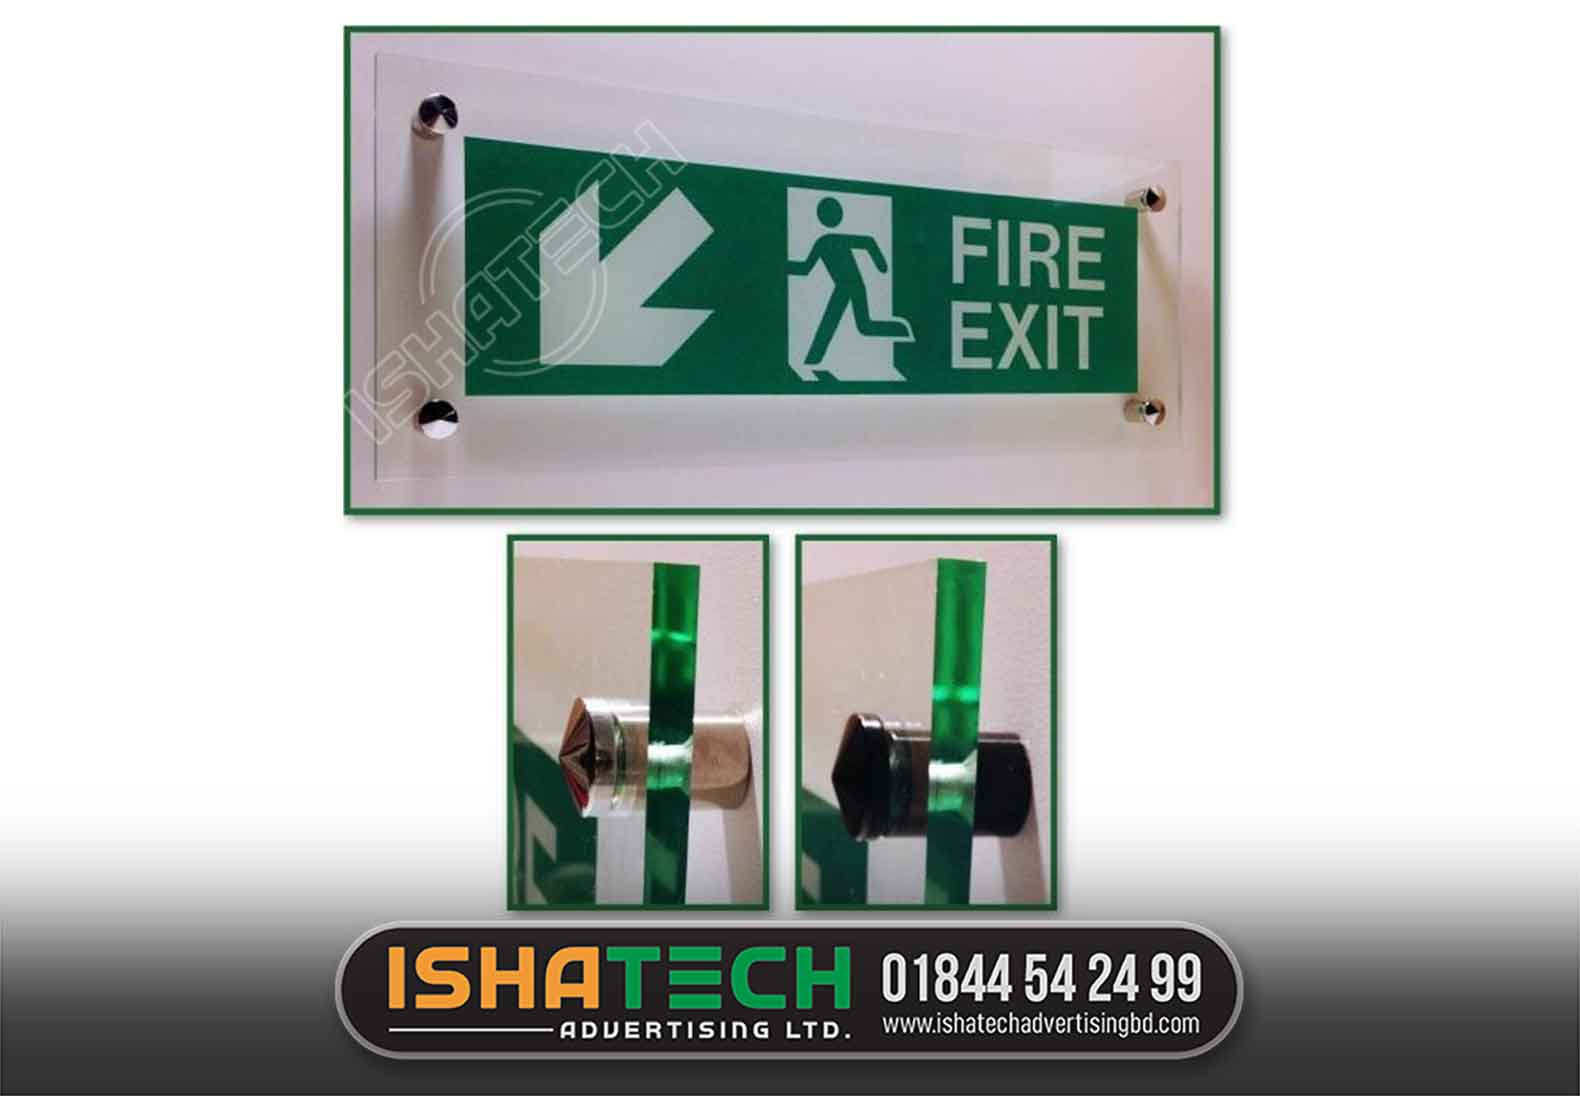 FIRE EXIT GLASS NAME PLATE, OFFICE GLASS NAME PLATE